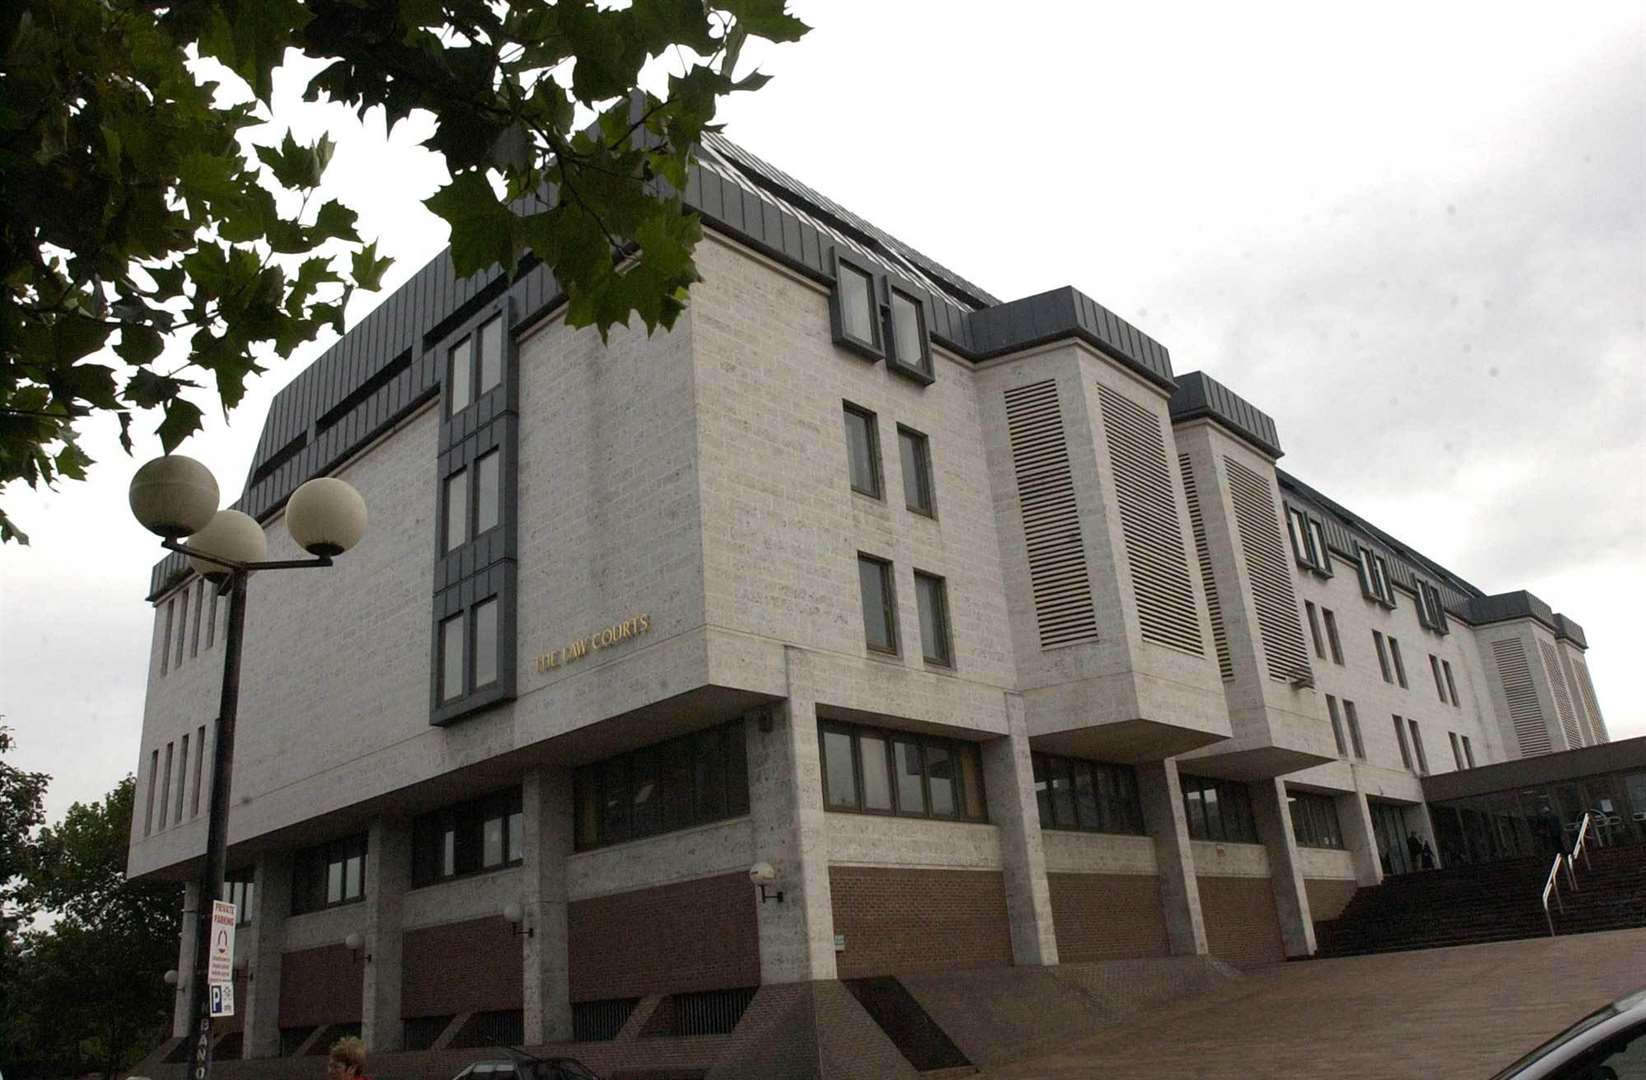 Knights is on trial accused of murdering Mr Chapman at Maidstone Crown Court